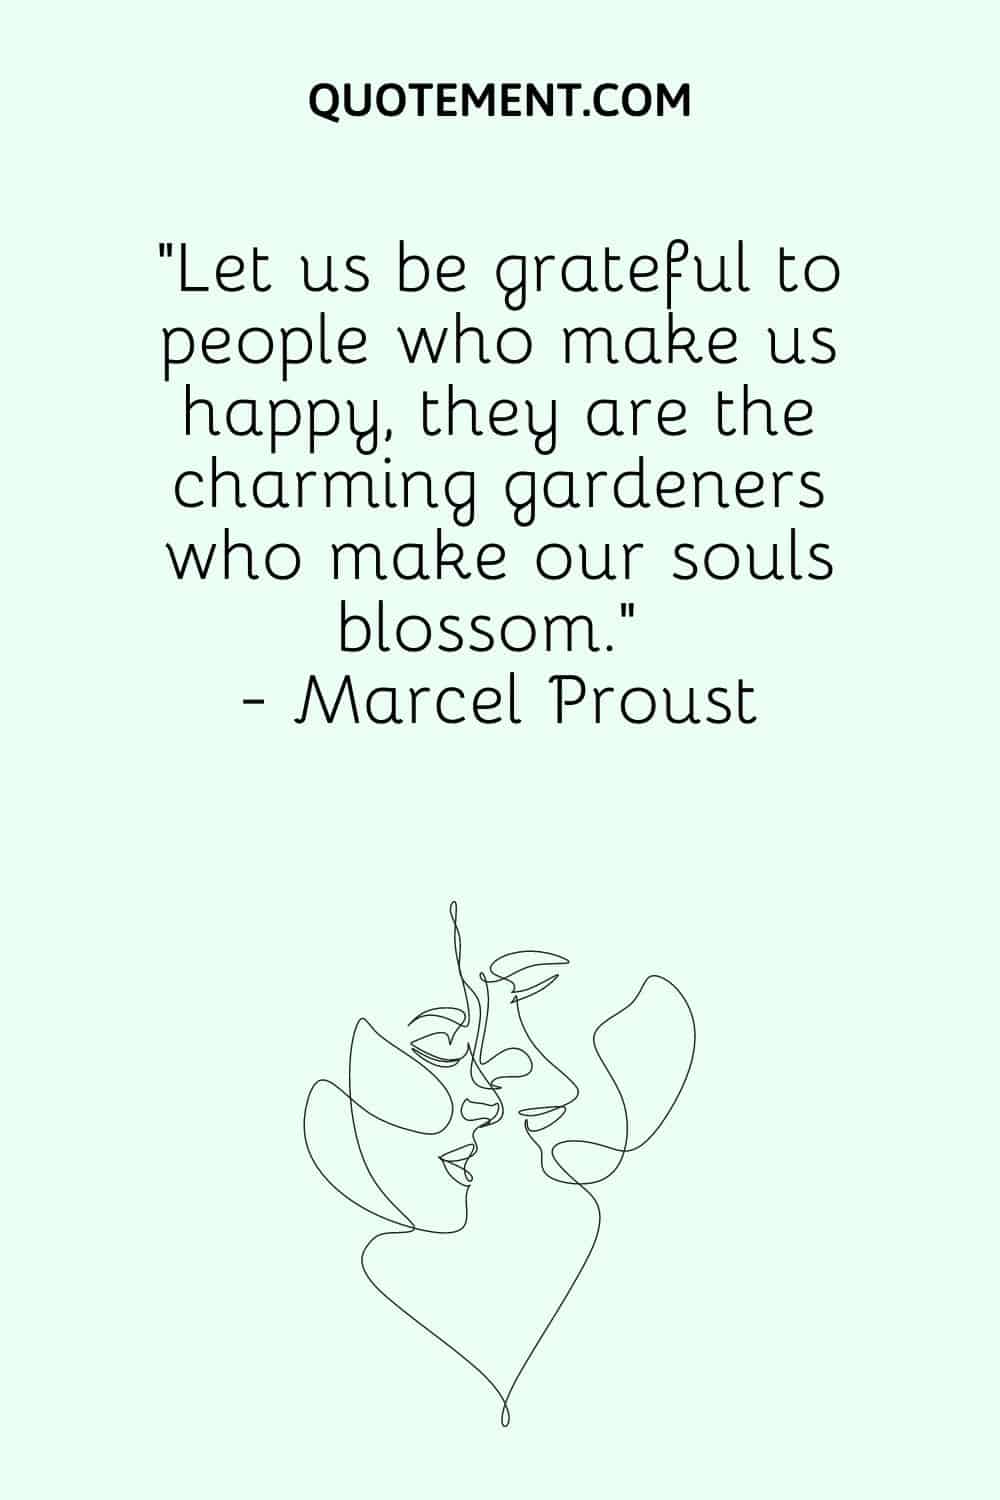 “Let us be grateful to people who make us happy, they are the charming gardeners who make our souls blossom.” - Marcel Proust